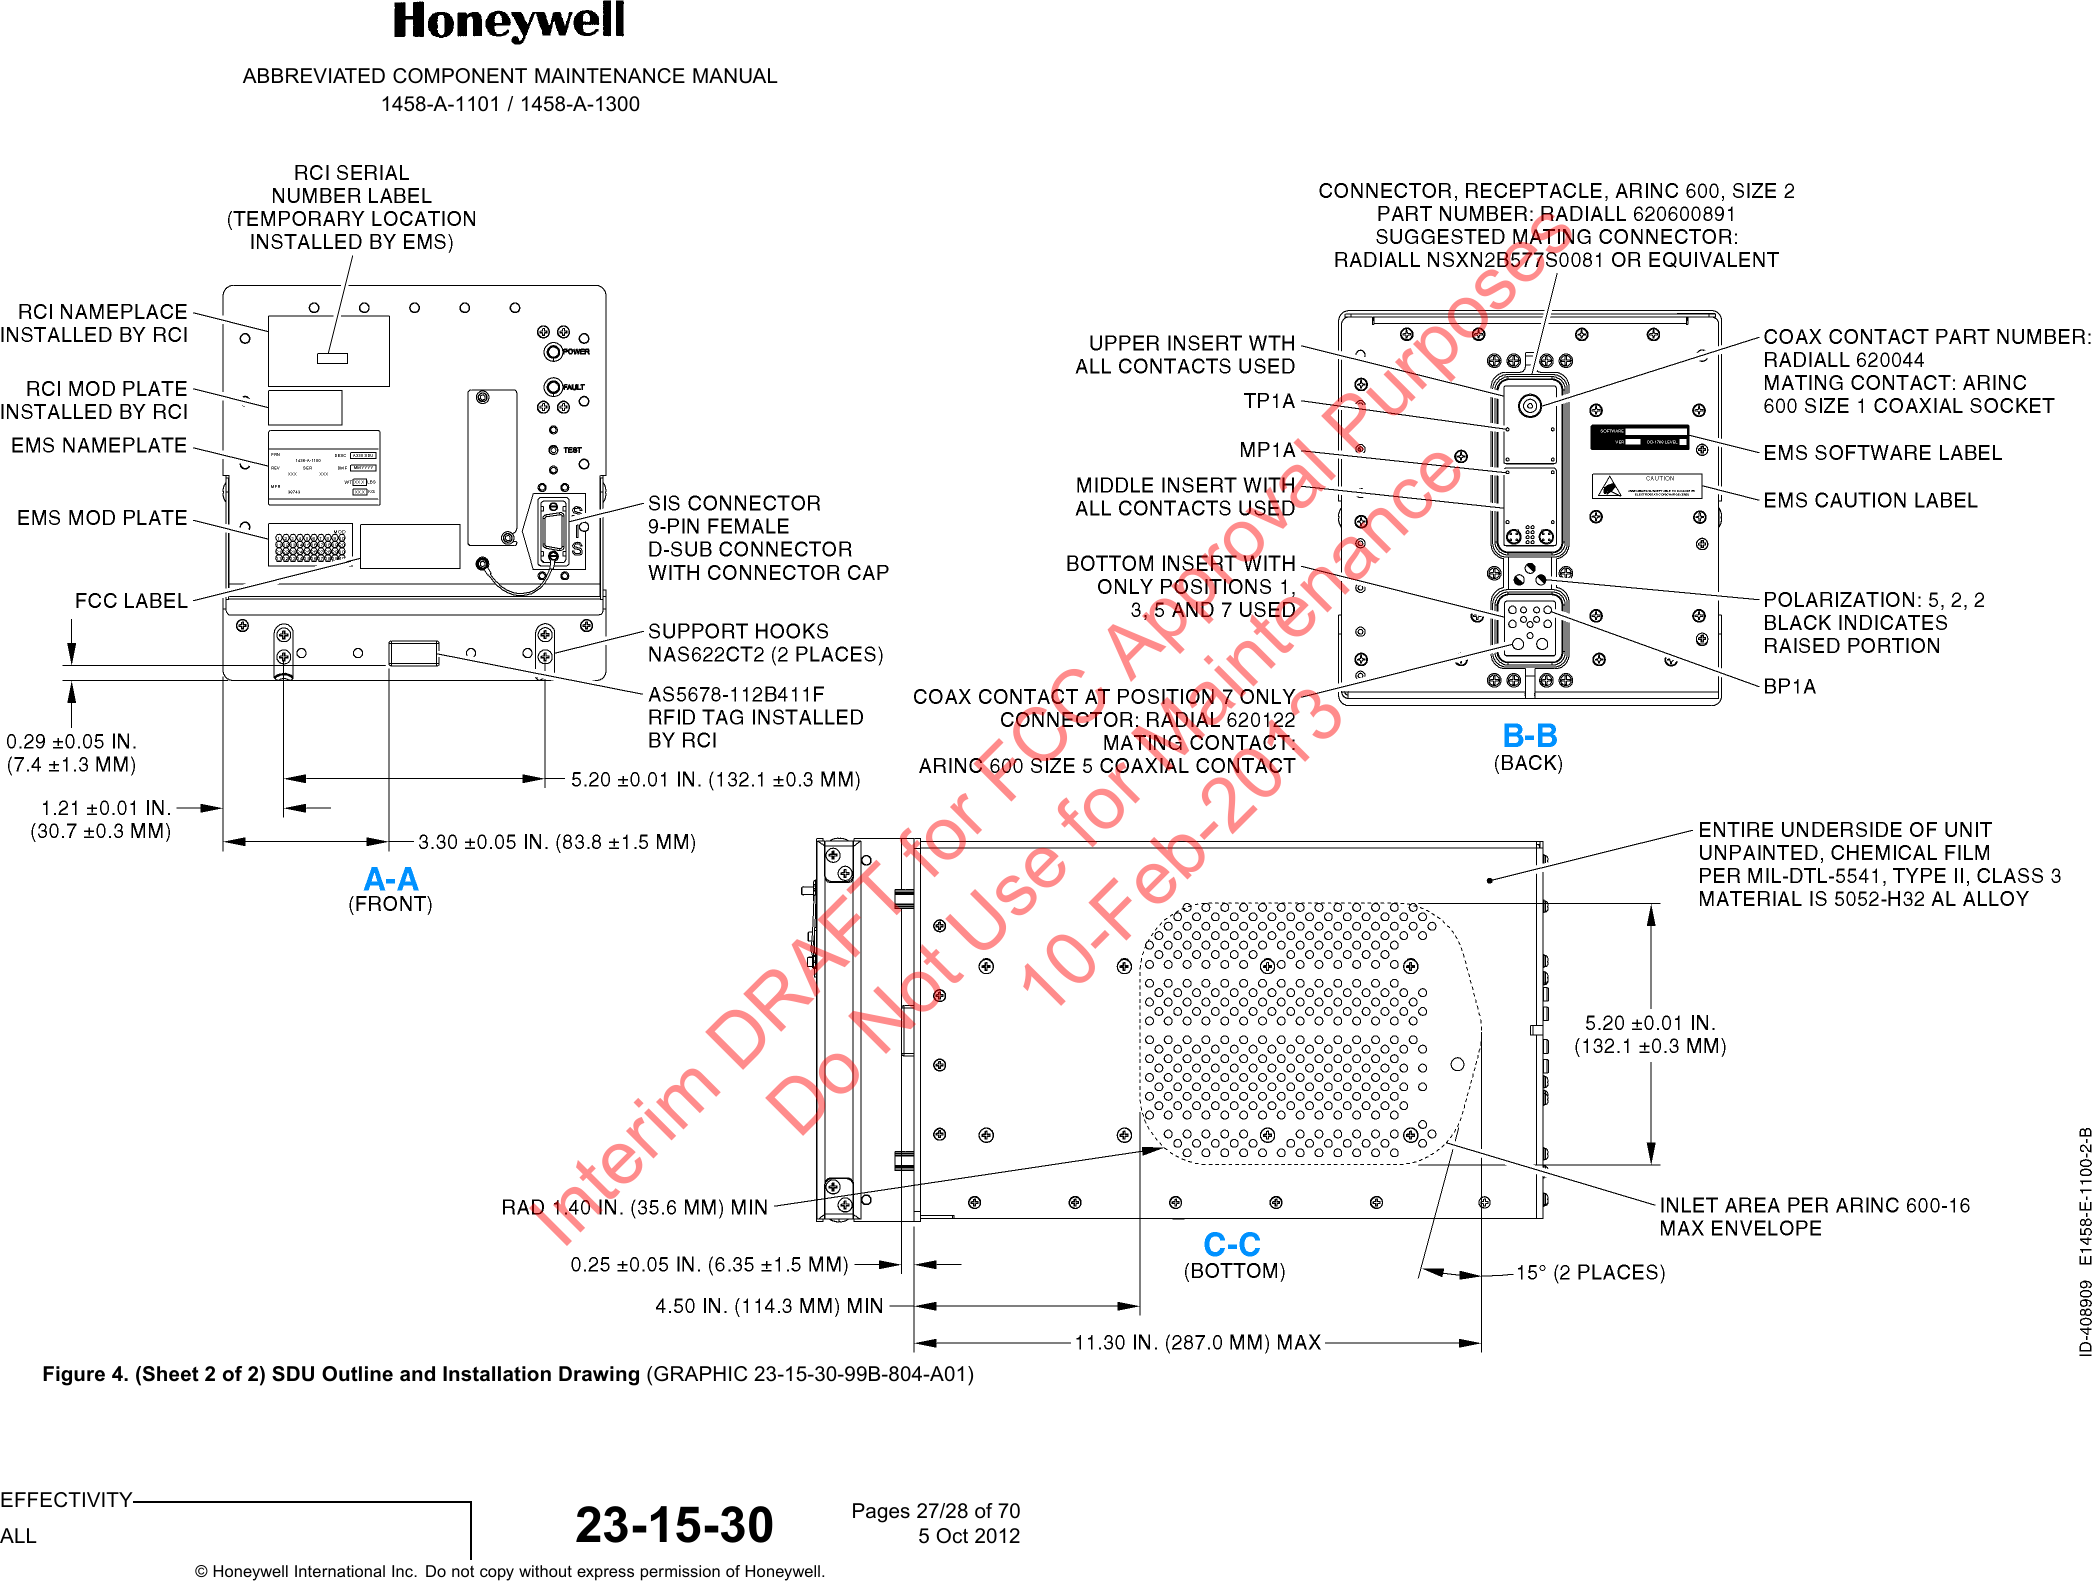 ABBREVIATED COMPONENT MAINTENANCE MANUAL1458-A-1101 / 1458-A-1300Figure 4. (Sheet 2 of 2) SDU Outline and Installation Drawing (GRAPHIC 23-15-30-99B-804-A01)EFFECTIVITYALL 23-15-30 Pages 27/28 of 705 Oct 2012© Honeywell International Inc. Do not copy without express permission of Honeywell.Interim DRAFT for FCC Approval Purposes Do Not Use for Maintenance 10-Feb-2013